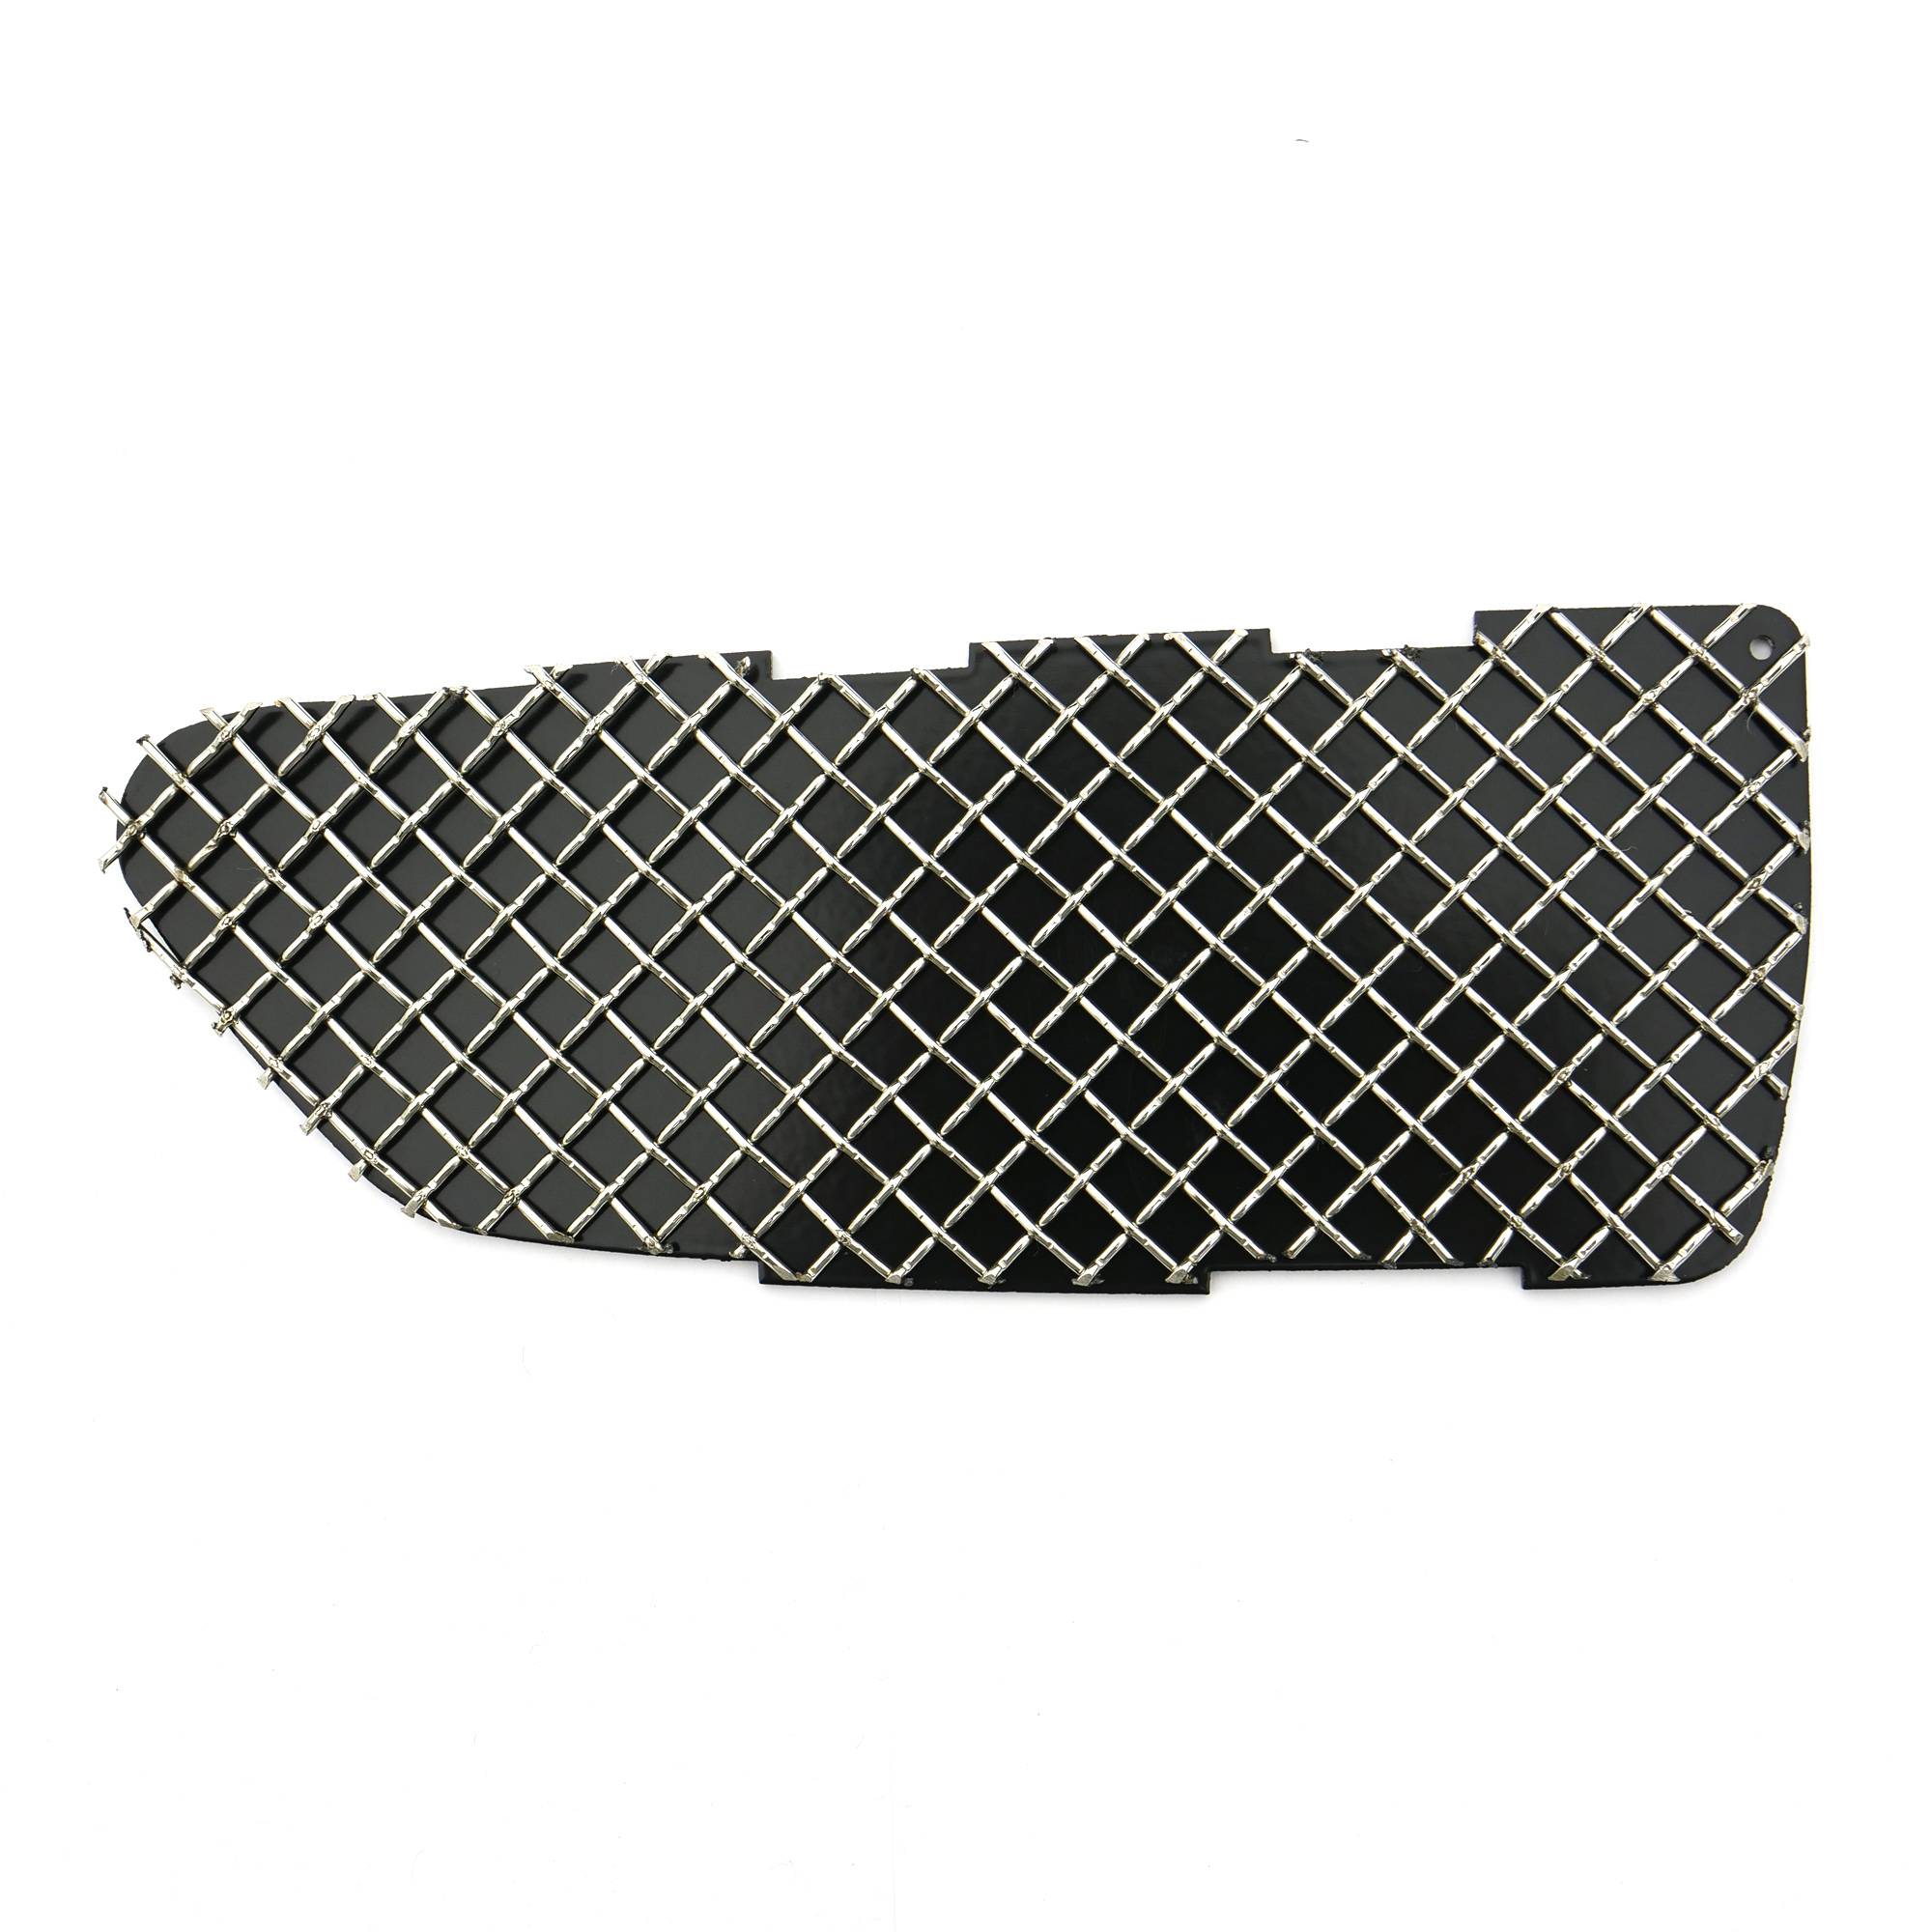 For 2011 Cadillac Escalade EXT T-Rex Side Vent Grille DJTM Insert 